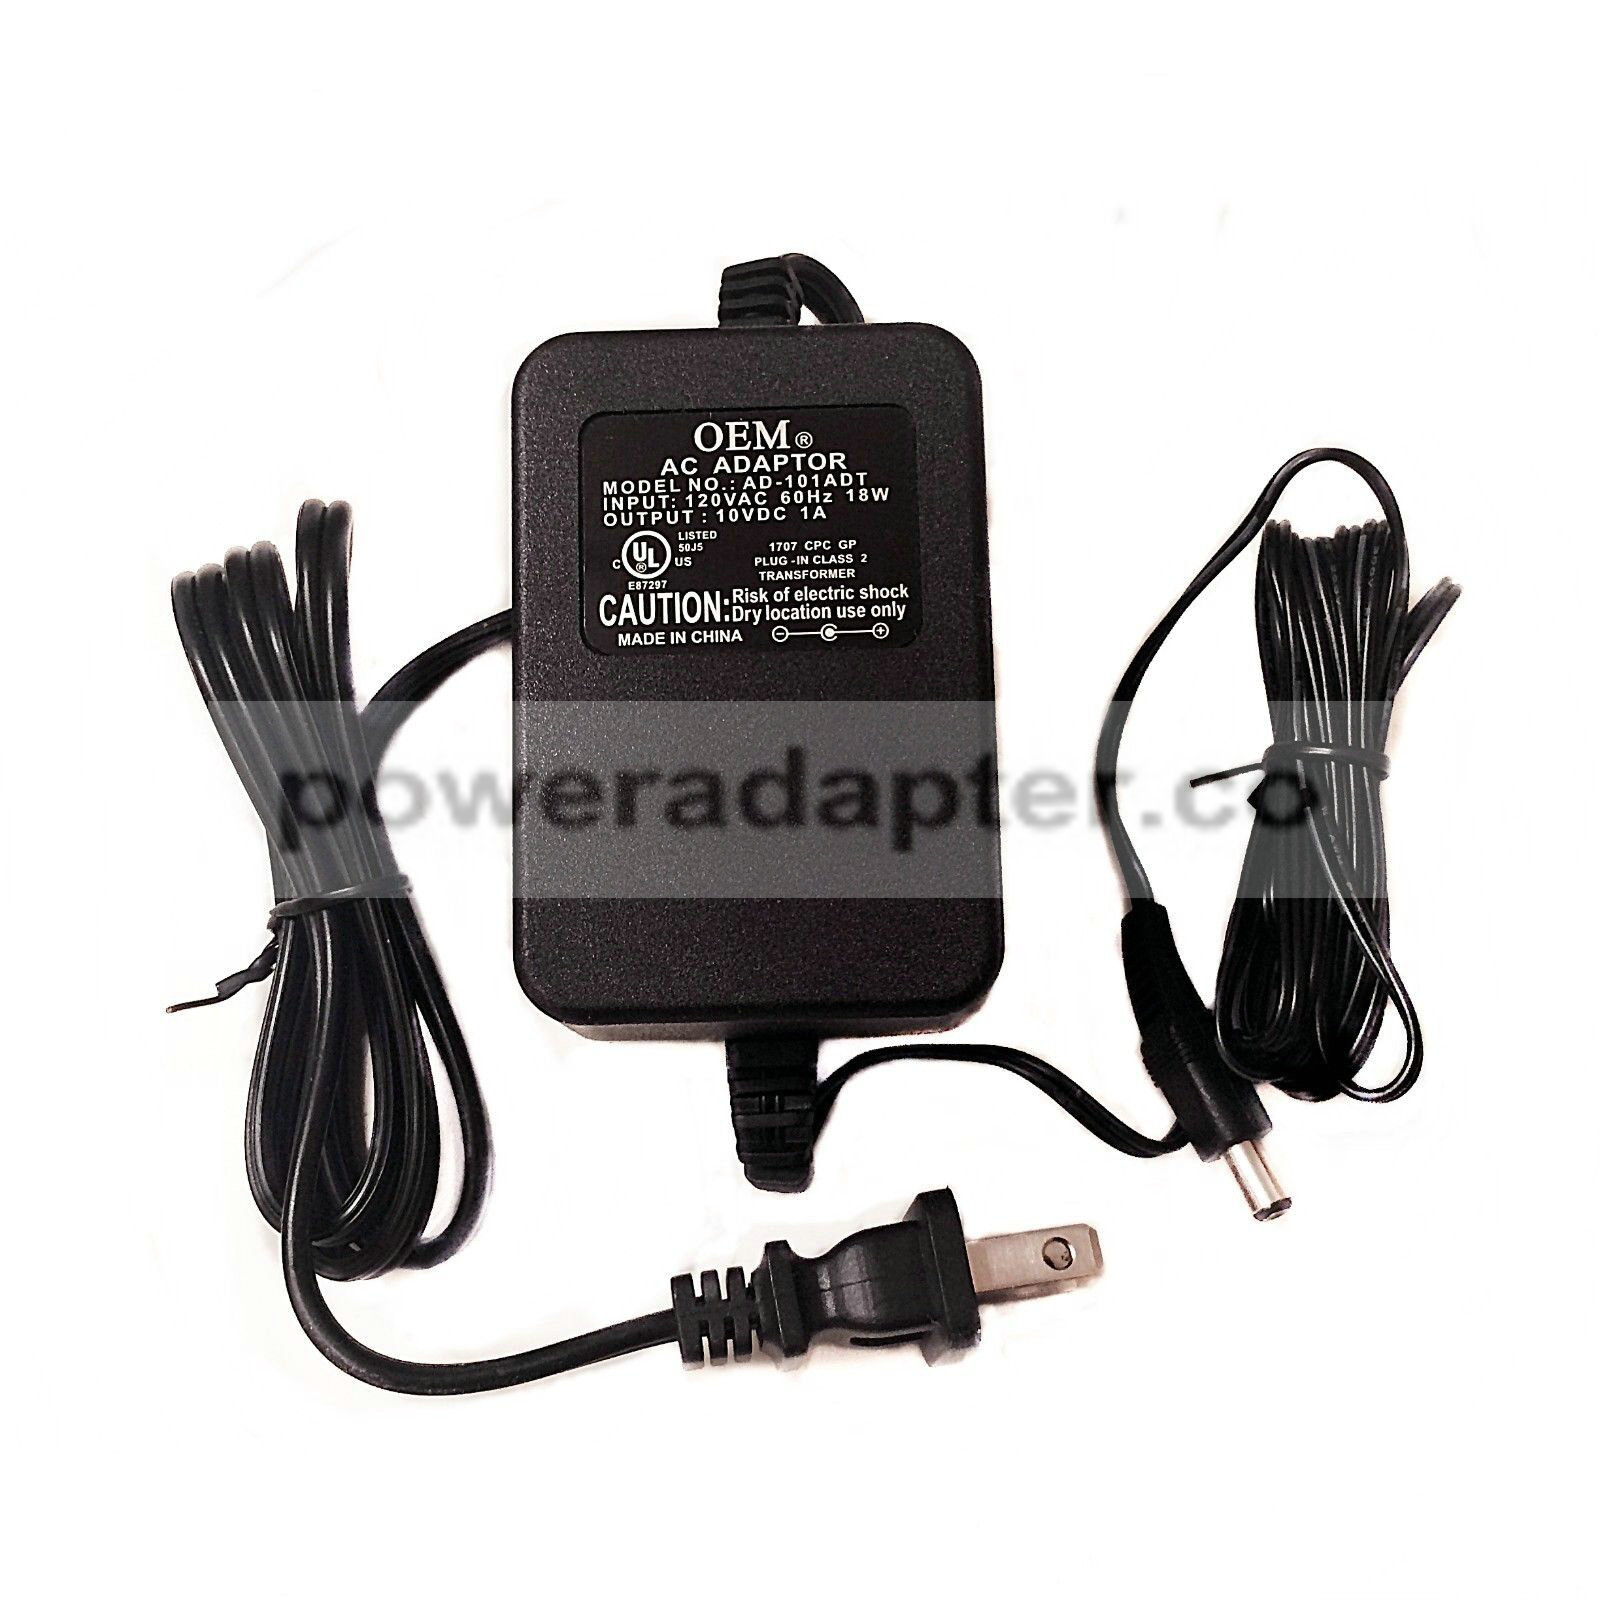 OEM AD-101ADT AC Power Adapter Supply - 10V 1A - 120VAC 60Hz 18W Condition: Used: An item that has been used previo - Click Image to Close